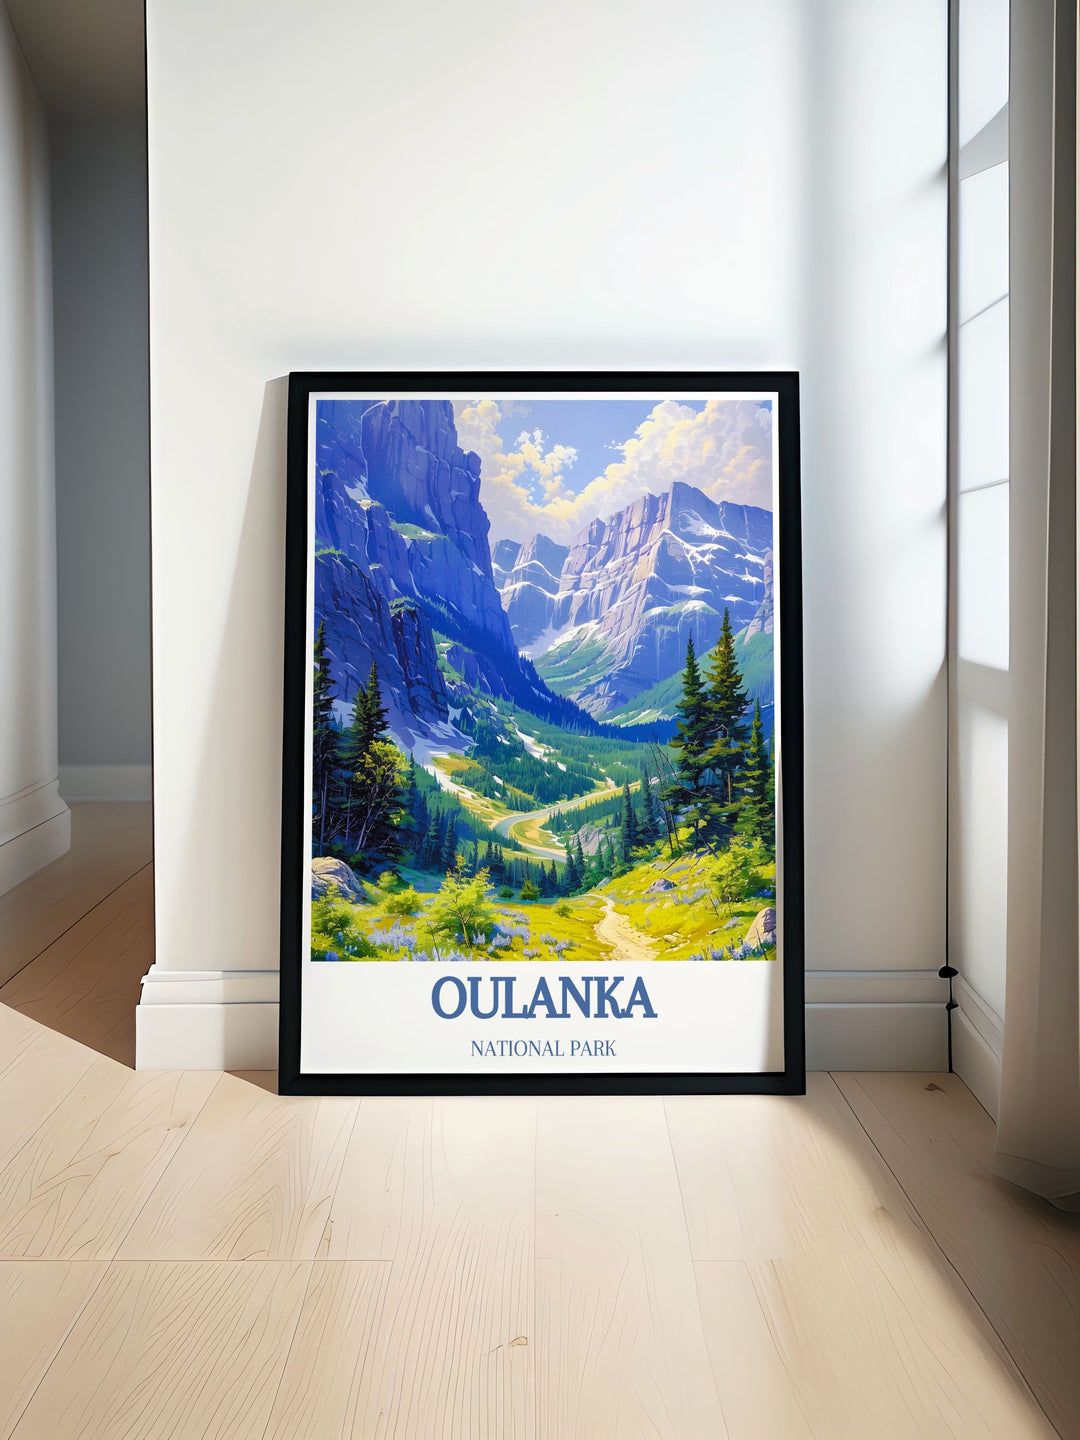 Finland Travel Print featuring Oulanka Canyon in Oulanka National Park capturing the vibrant colors and natural beauty of the canyon perfect for nature enthusiasts and adventurers looking to bring a piece of Scandinavian wilderness into their home decor